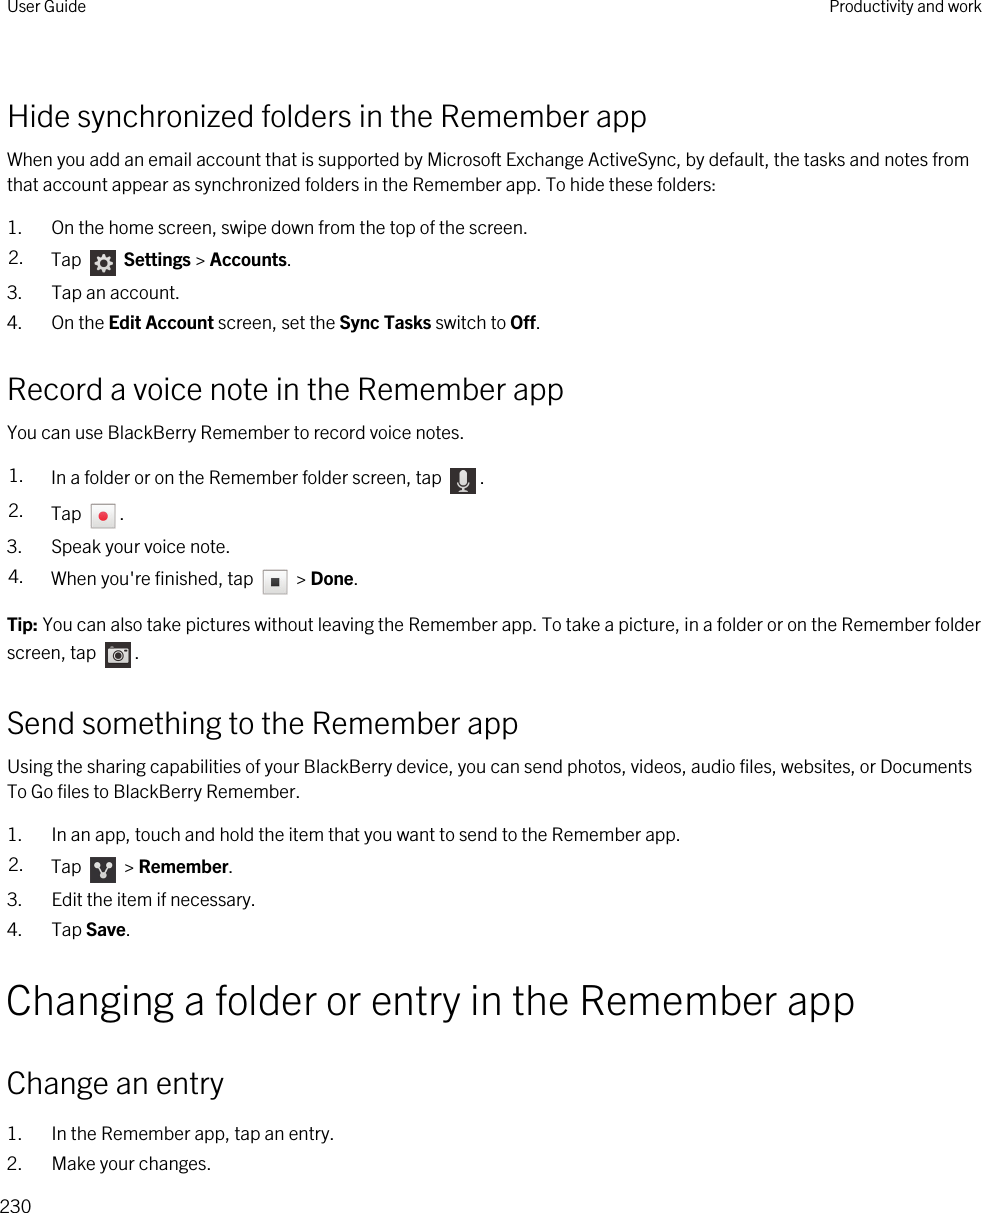 Hide synchronized folders in the Remember appWhen you add an email account that is supported by Microsoft Exchange ActiveSync, by default, the tasks and notes from that account appear as synchronized folders in the Remember app. To hide these folders:1. On the home screen, swipe down from the top of the screen.2. Tap   Settings &gt; Accounts.3. Tap an account.4. On the Edit Account screen, set the Sync Tasks switch to Off.Record a voice note in the Remember appYou can use BlackBerry Remember to record voice notes.1. In a folder or on the Remember folder screen, tap  .2. Tap  .3. Speak your voice note.4. When you&apos;re finished, tap   &gt; Done.Tip: You can also take pictures without leaving the Remember app. To take a picture, in a folder or on the Remember folder screen, tap  .Send something to the Remember appUsing the sharing capabilities of your BlackBerry device, you can send photos, videos, audio files, websites, or Documents To Go files to BlackBerry Remember.1. In an app, touch and hold the item that you want to send to the Remember app.2. Tap   &gt; Remember.3. Edit the item if necessary.4. Tap Save.Changing a folder or entry in the Remember appChange an entry1. In the Remember app, tap an entry.2. Make your changes.User Guide Productivity and work230